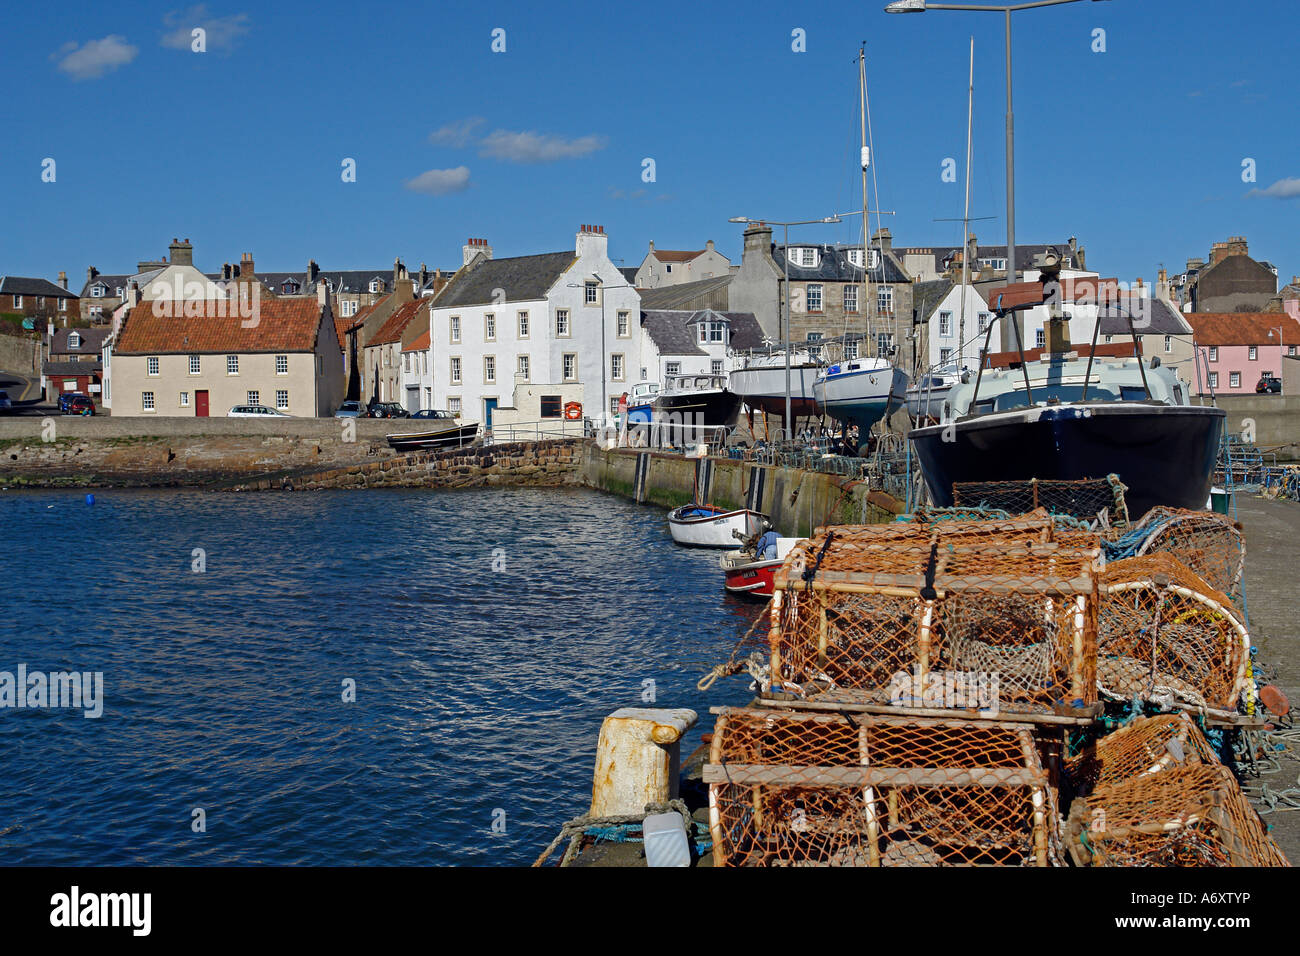 Fishing gear and boats on a pier in St. Monans harbour in Fife Scotland with traditional houses in the background. Stock Photo